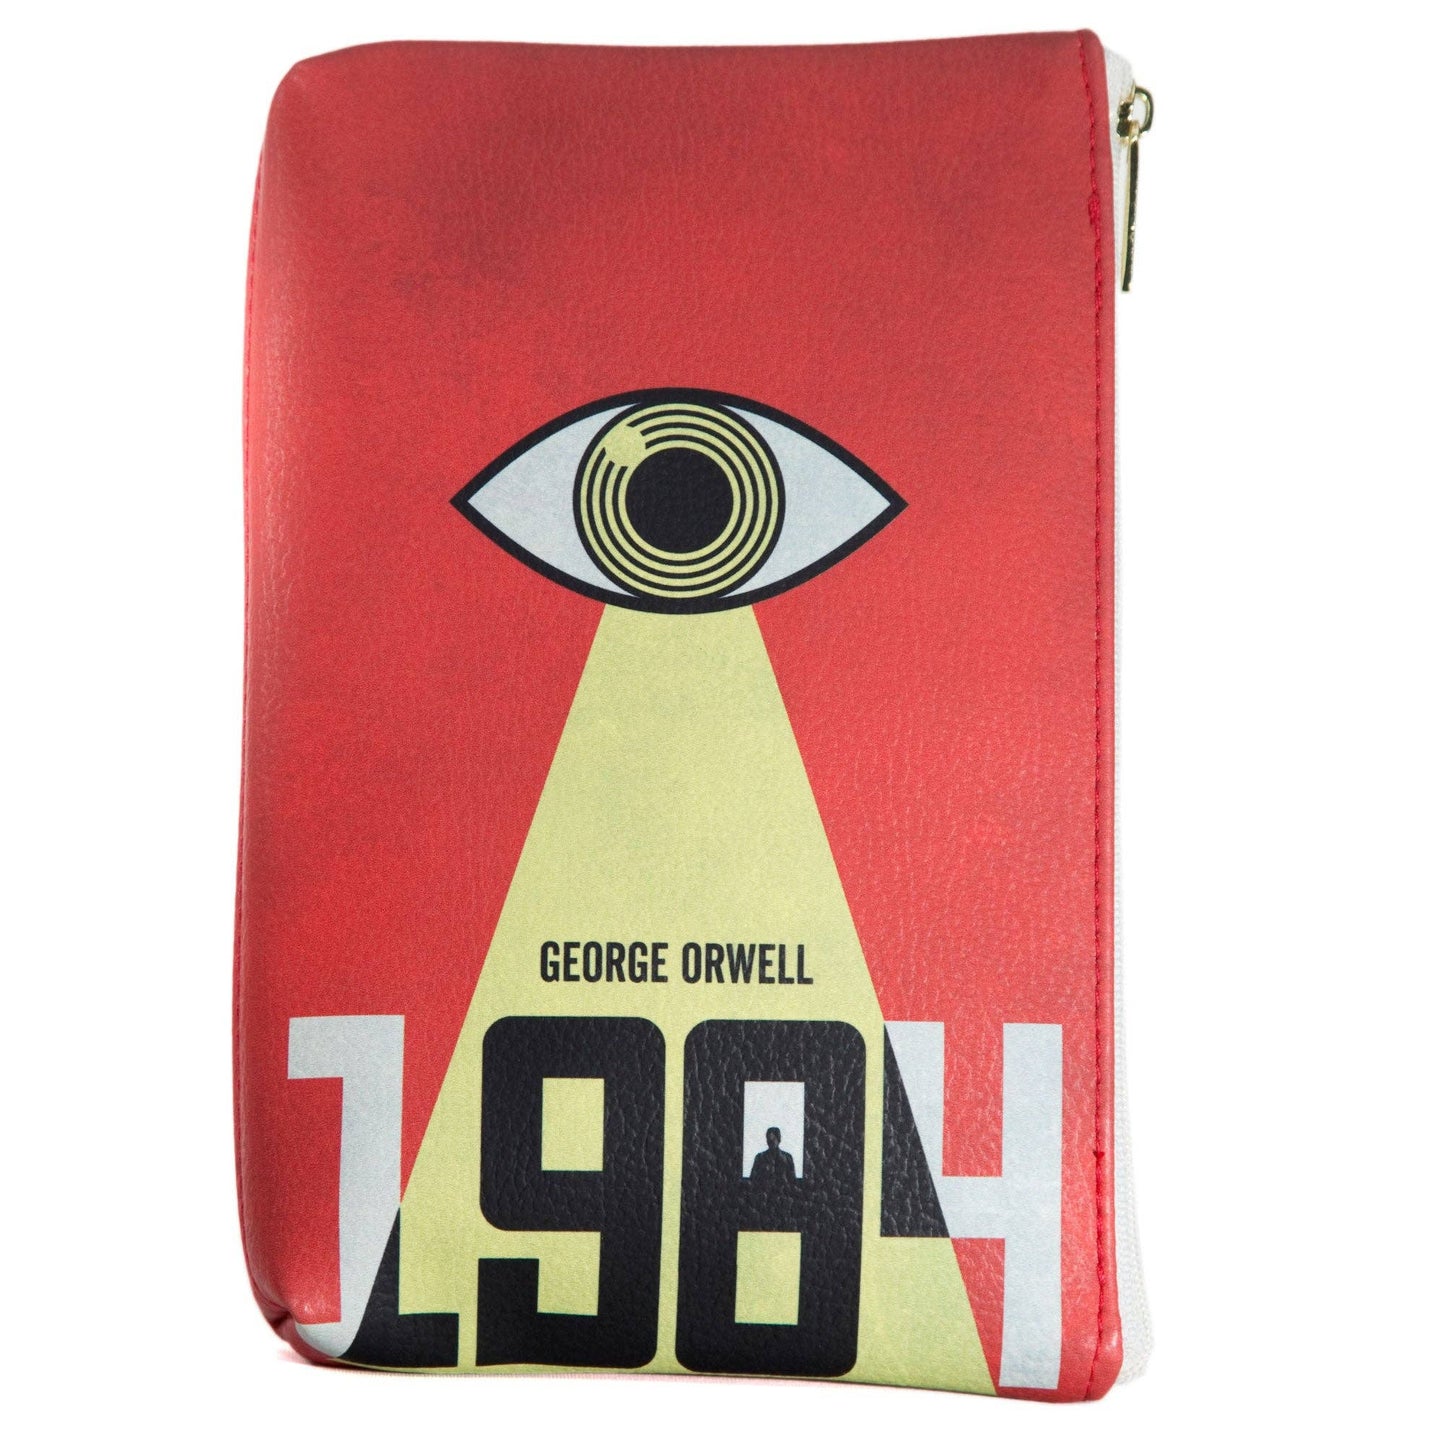 1984 Pouch